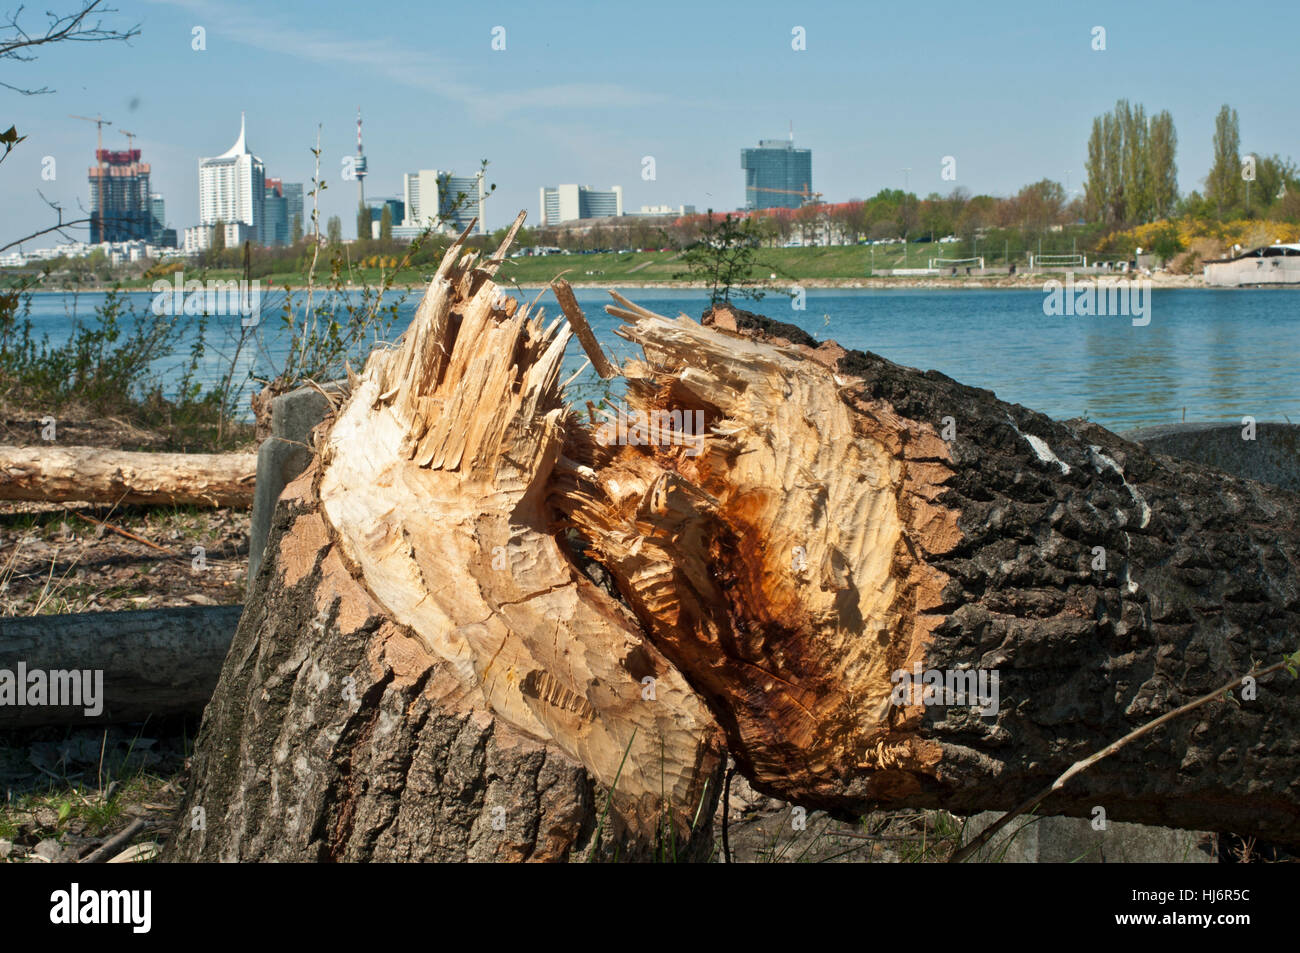 beaver tree on the danube island in front of the viennese skyline Stock Photo